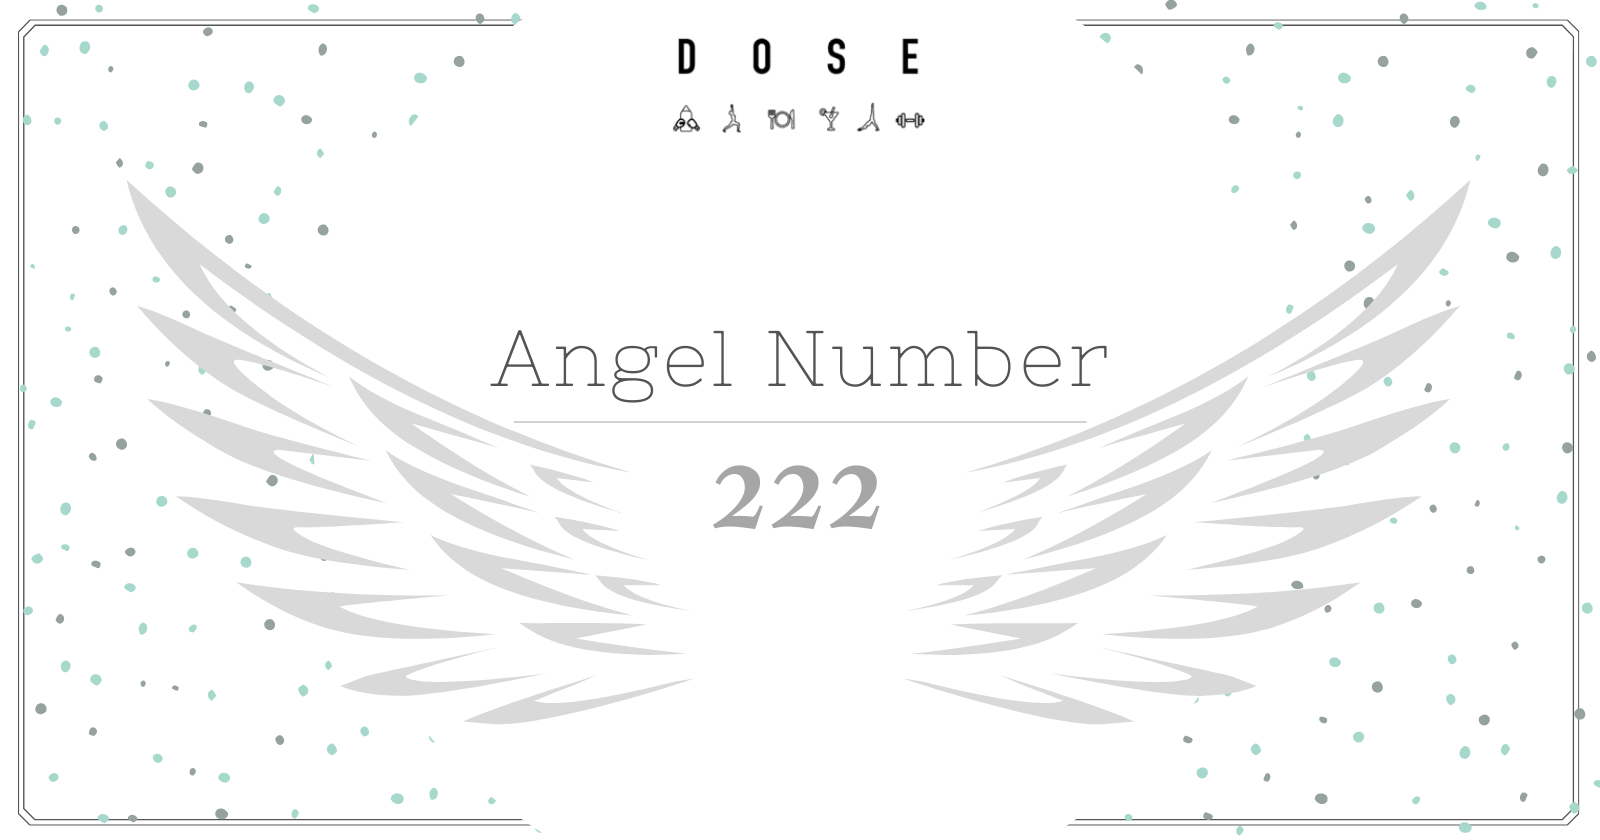 Details more than 81 222 angel number tattoo  thtantai2